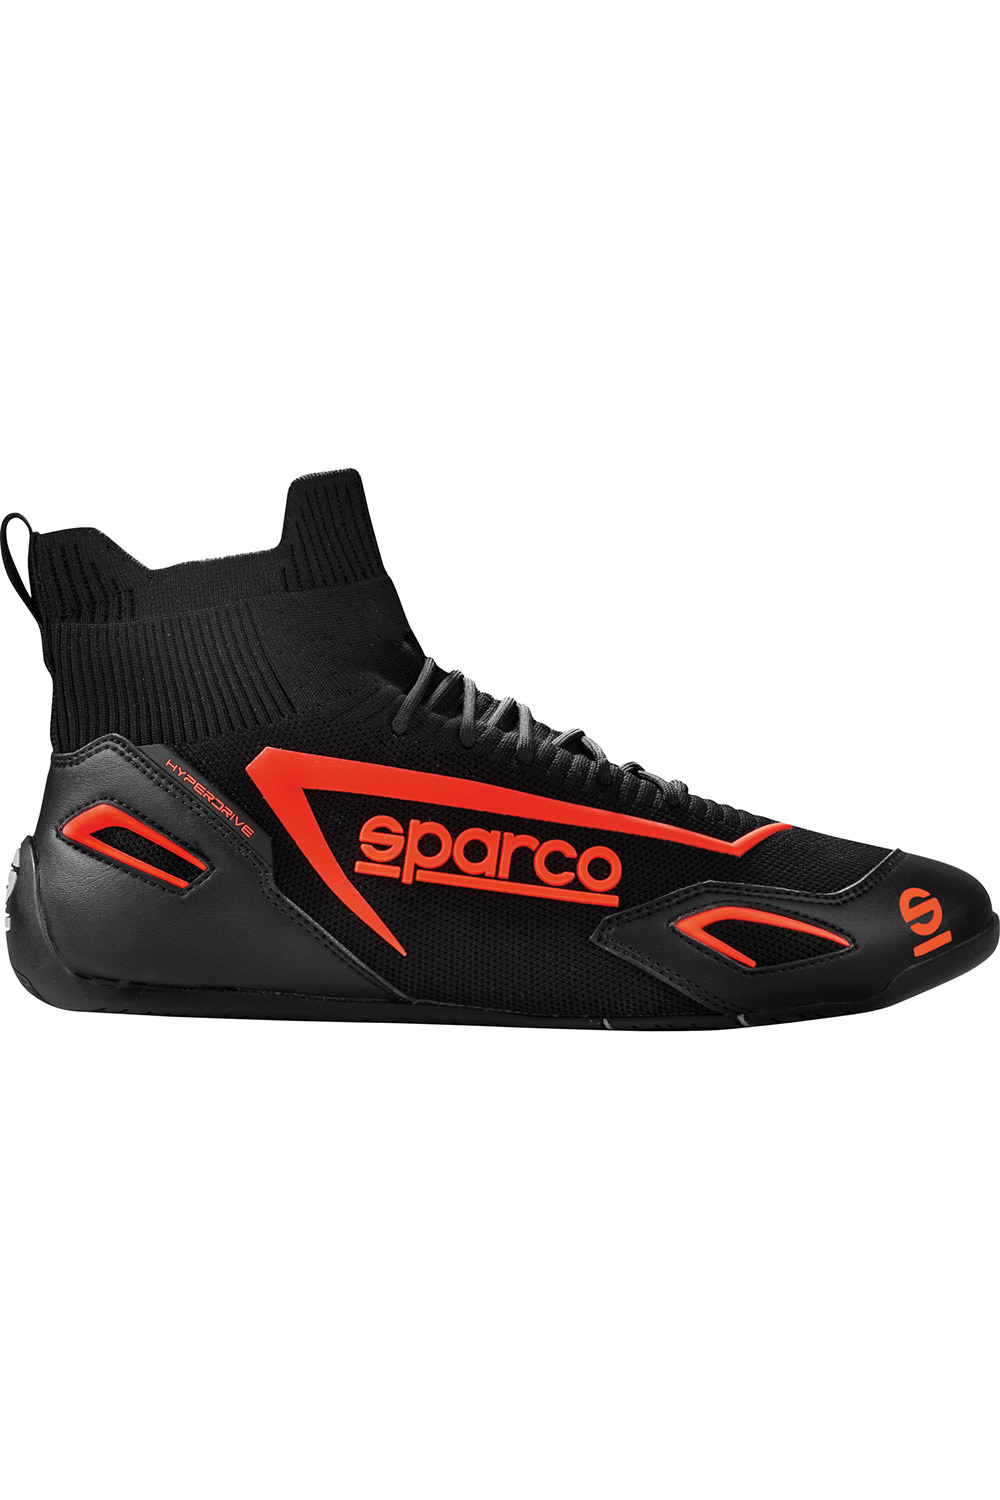 Sparco Hyperdrive SimRacing Shoes Black-Red